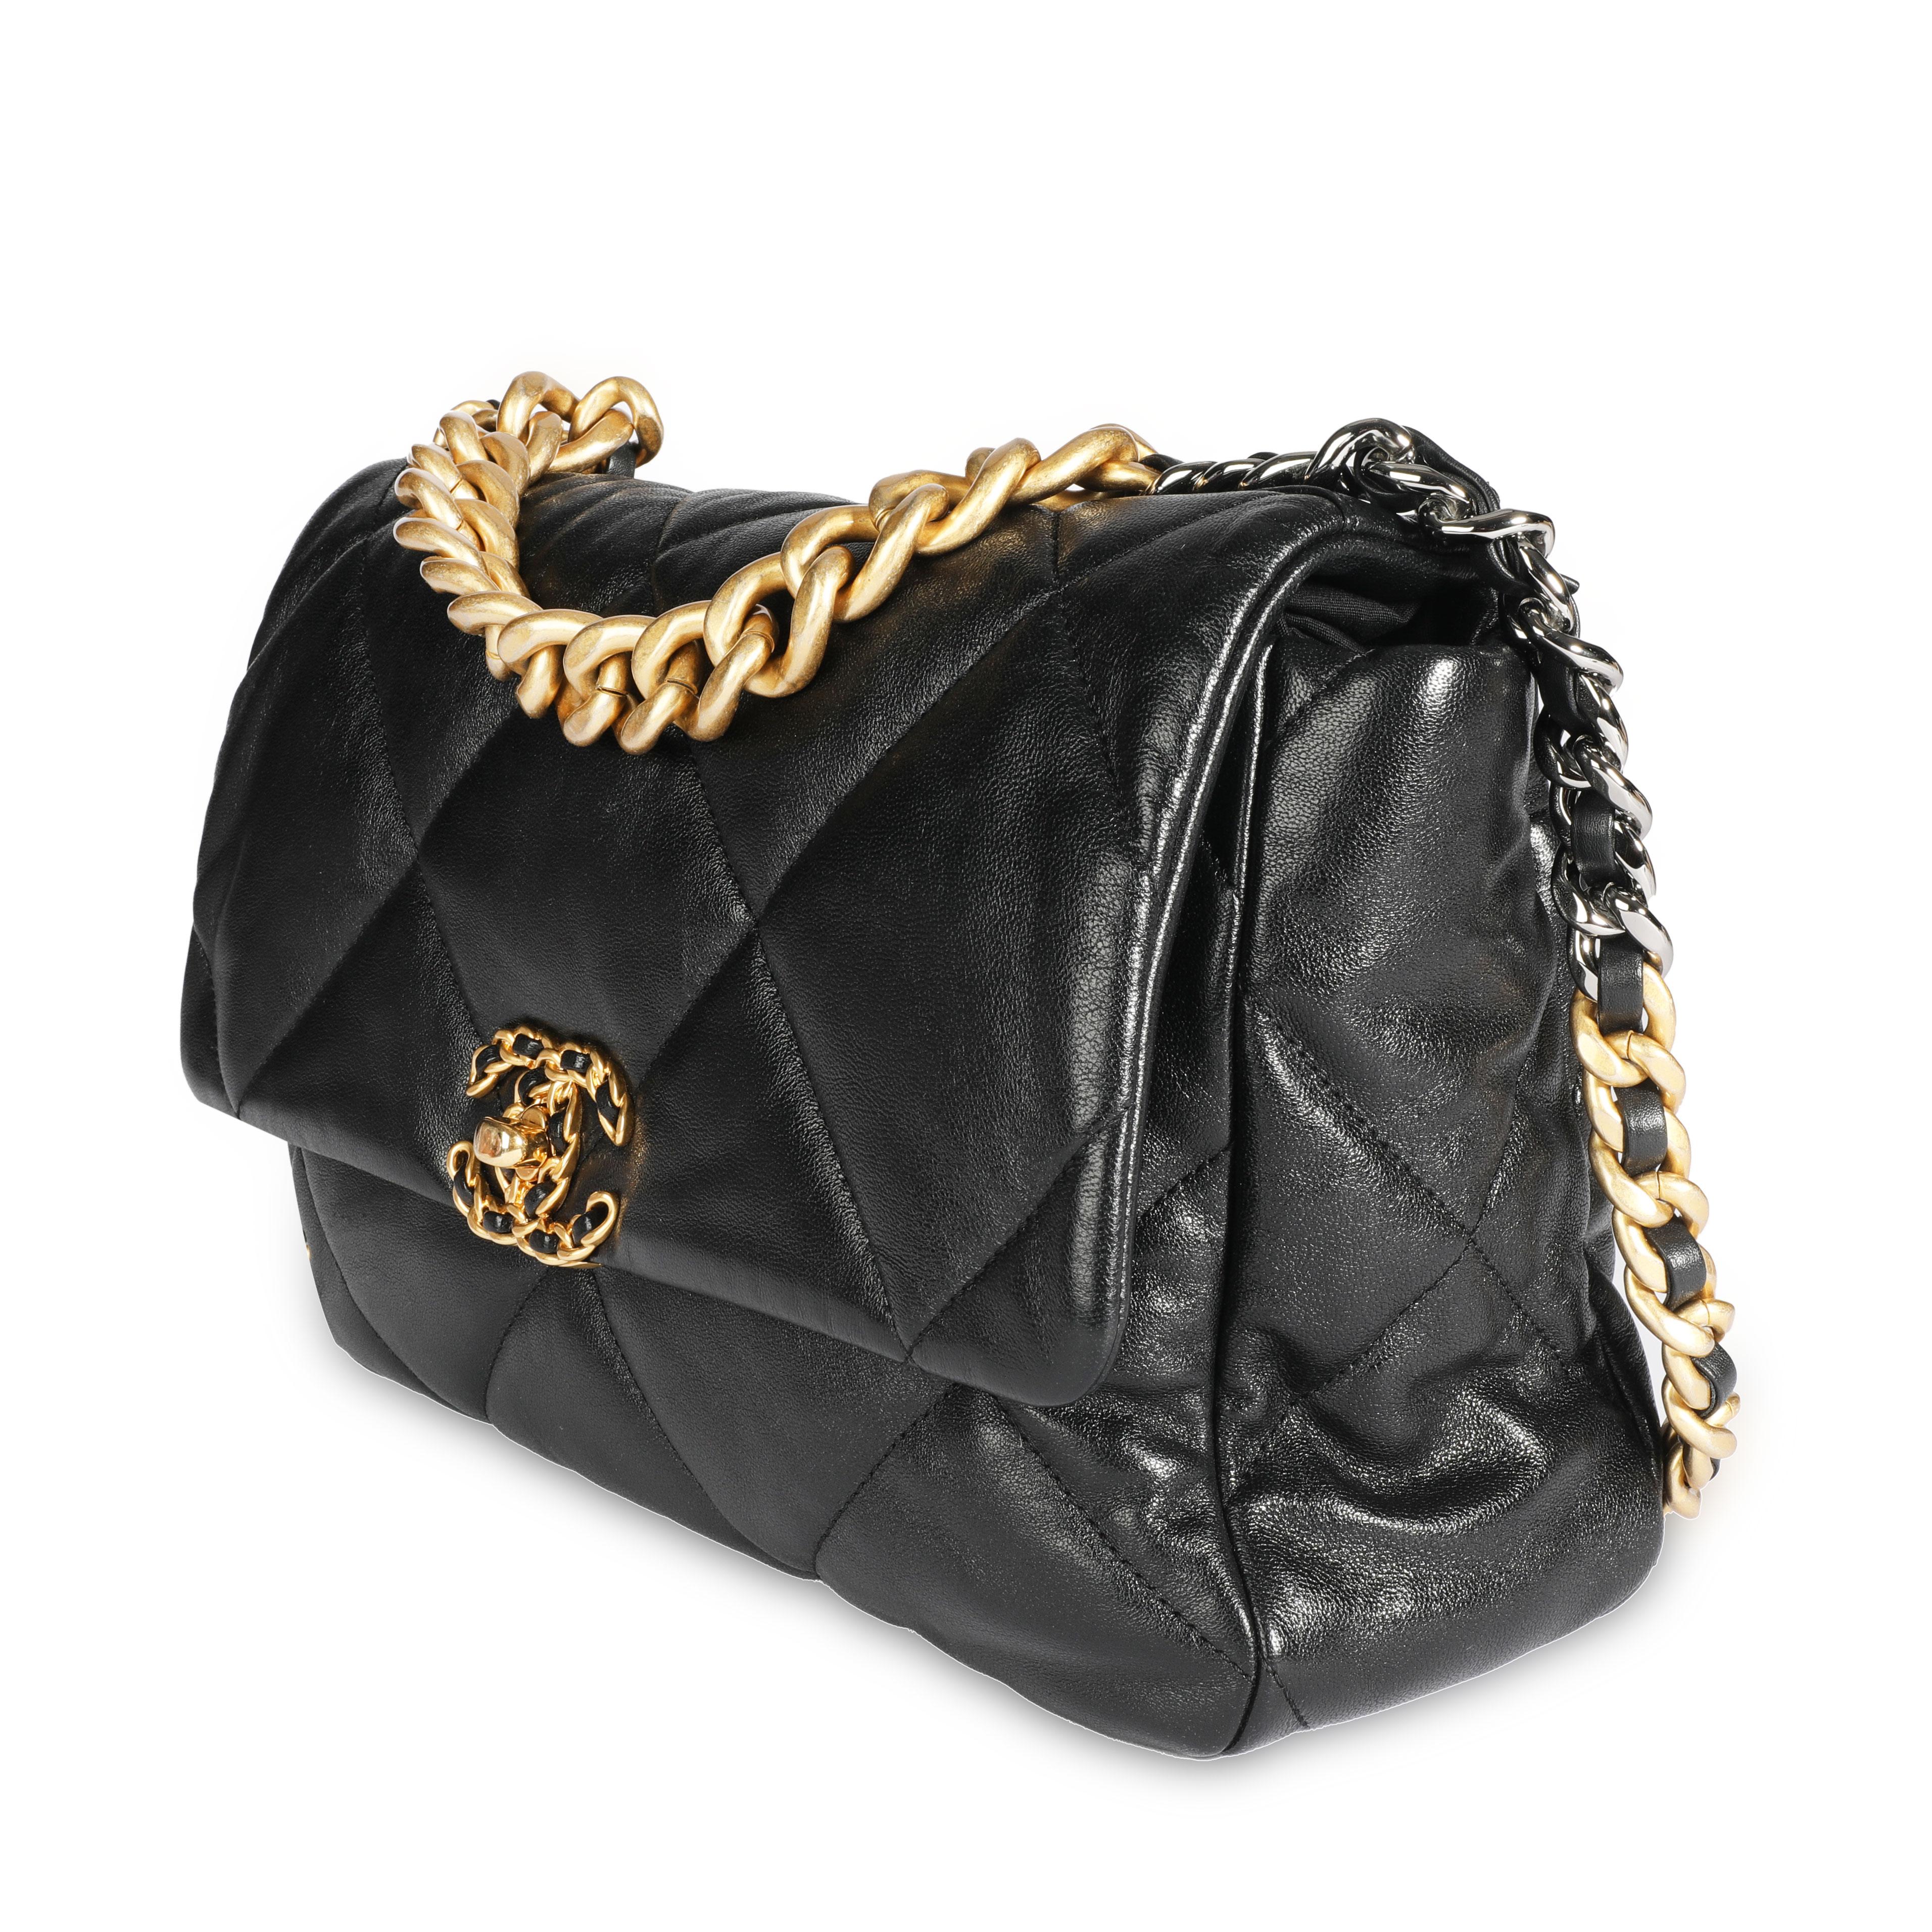 
Listing Title: Chanel Black Quilted Lambskin Chanel 19 Large Flap Bag
SKU: 108901
MSRP:  
Condition: Pre-owned (3000)
Condition Description: 
Handbag Condition: Excellent
Condition Comments: Excellent Condition. No visible signs of wear.
Brand: